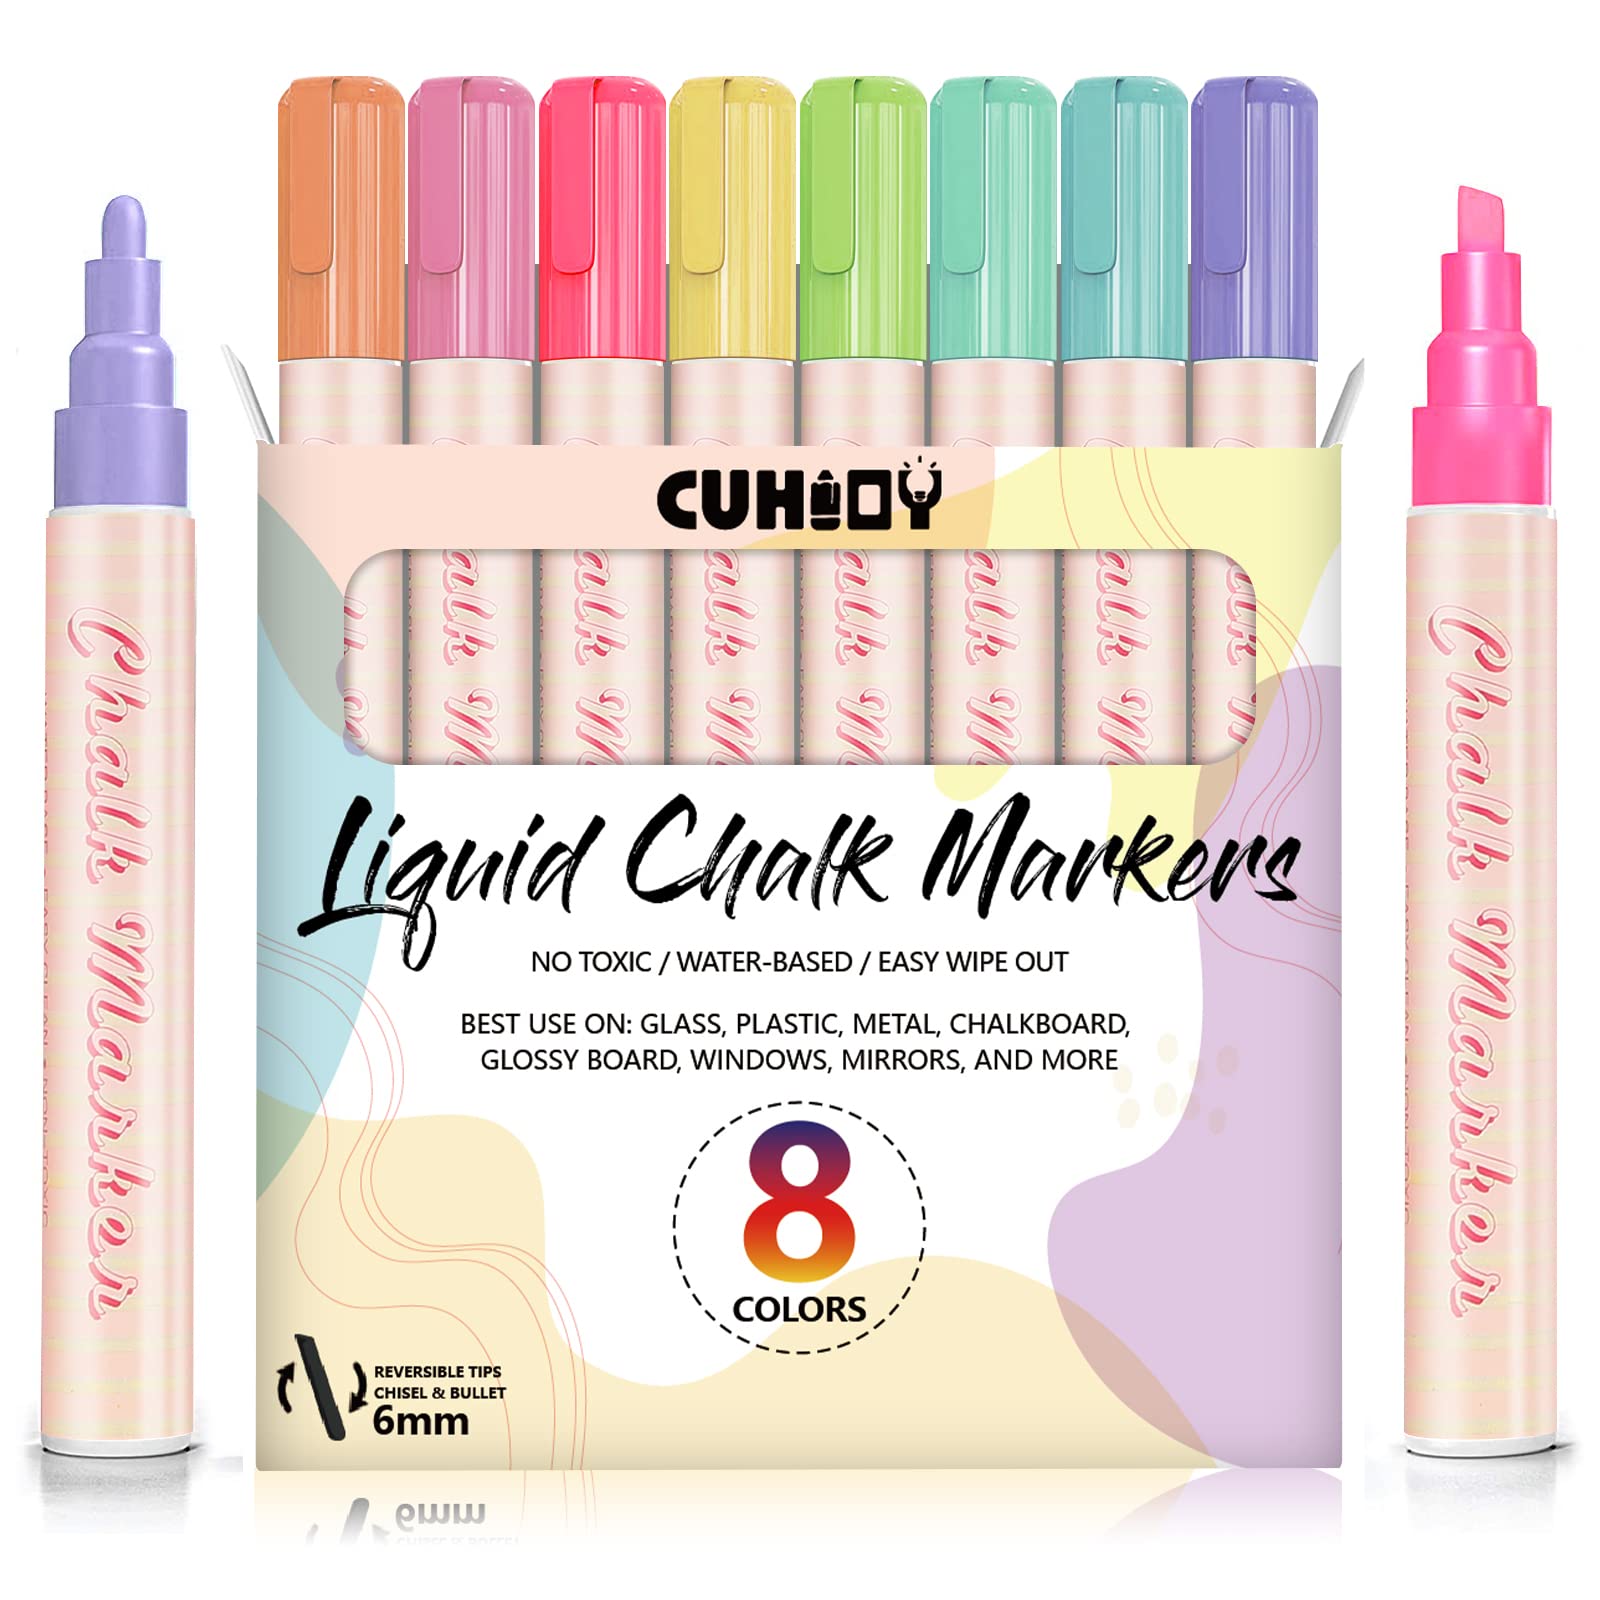  Chalk Markers - 8 Pastel, Erasable, Non-Toxic, Water